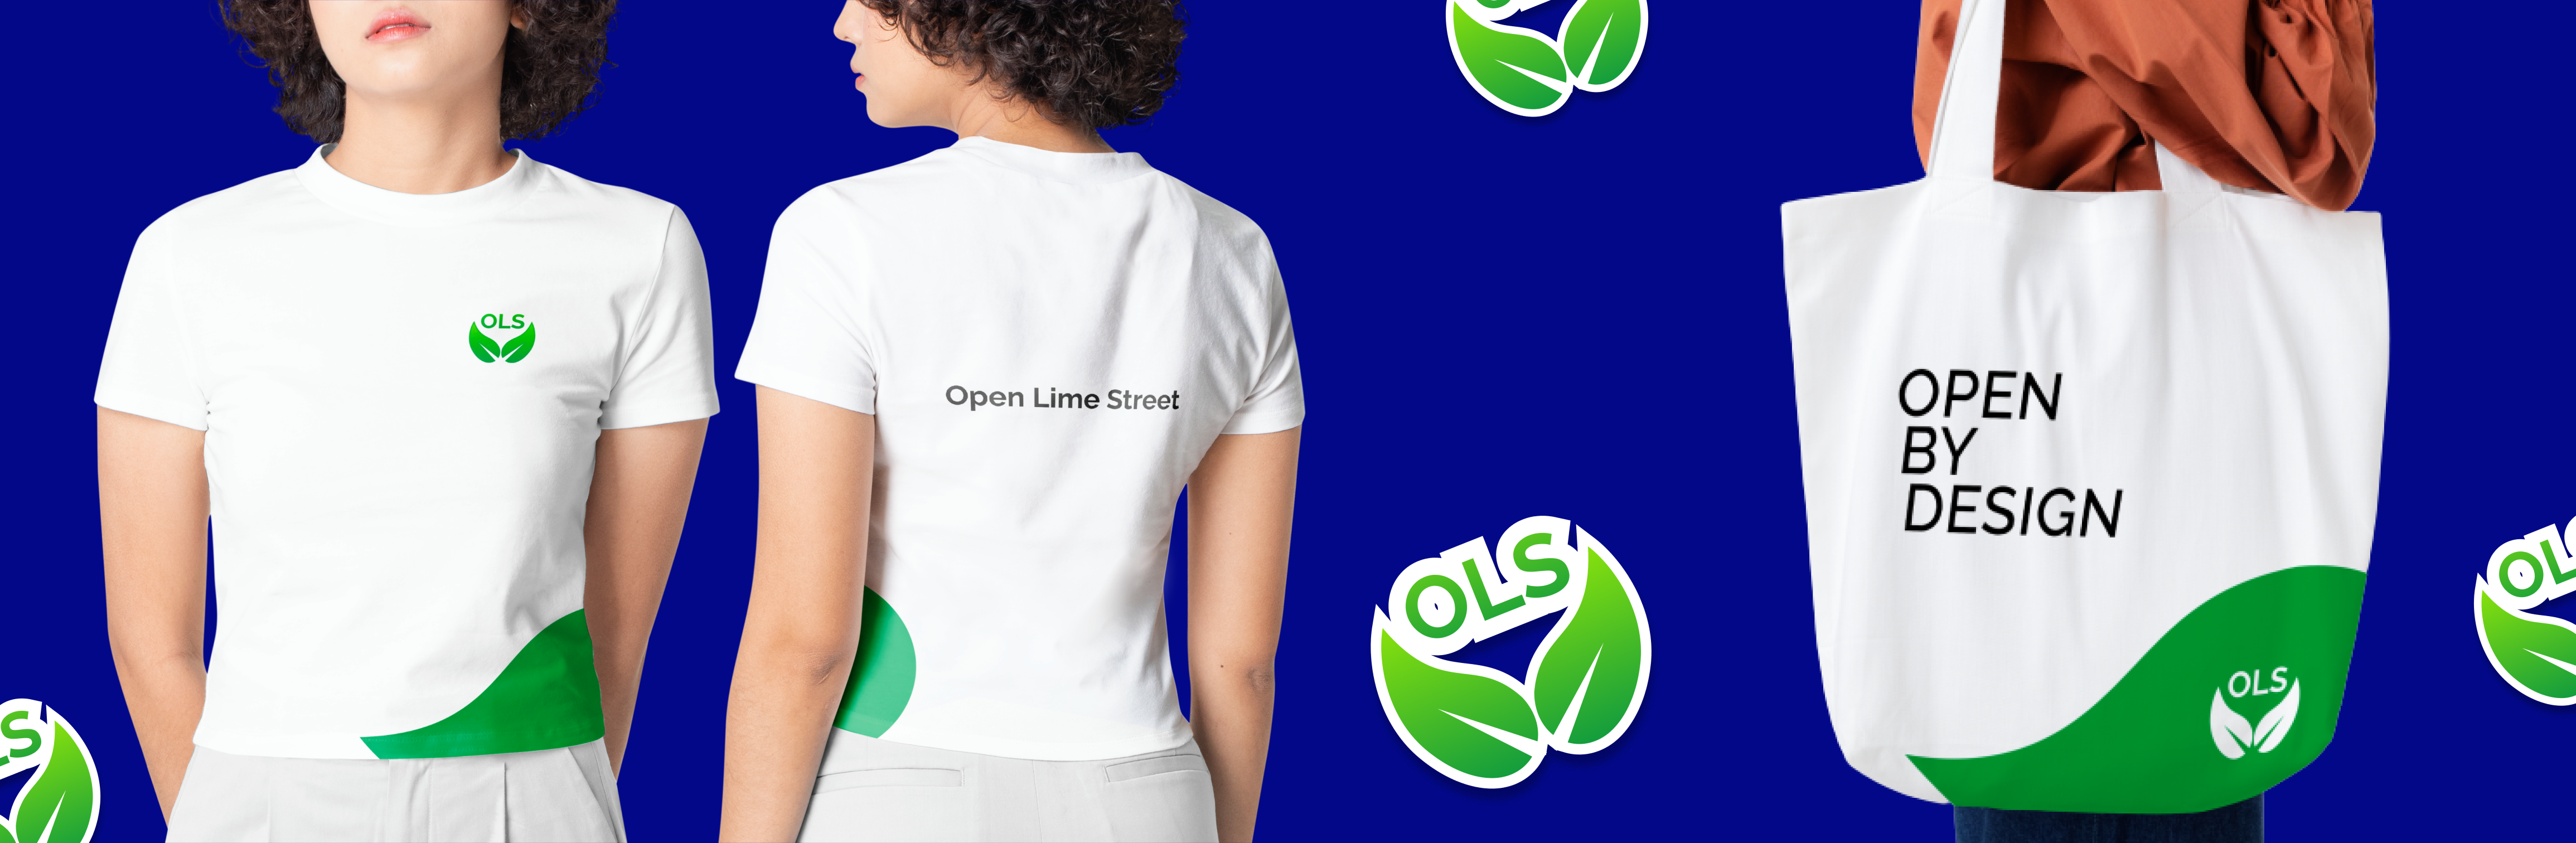 The image shows the new OLS brand identity applied to different objects such as T-shirts and bags.